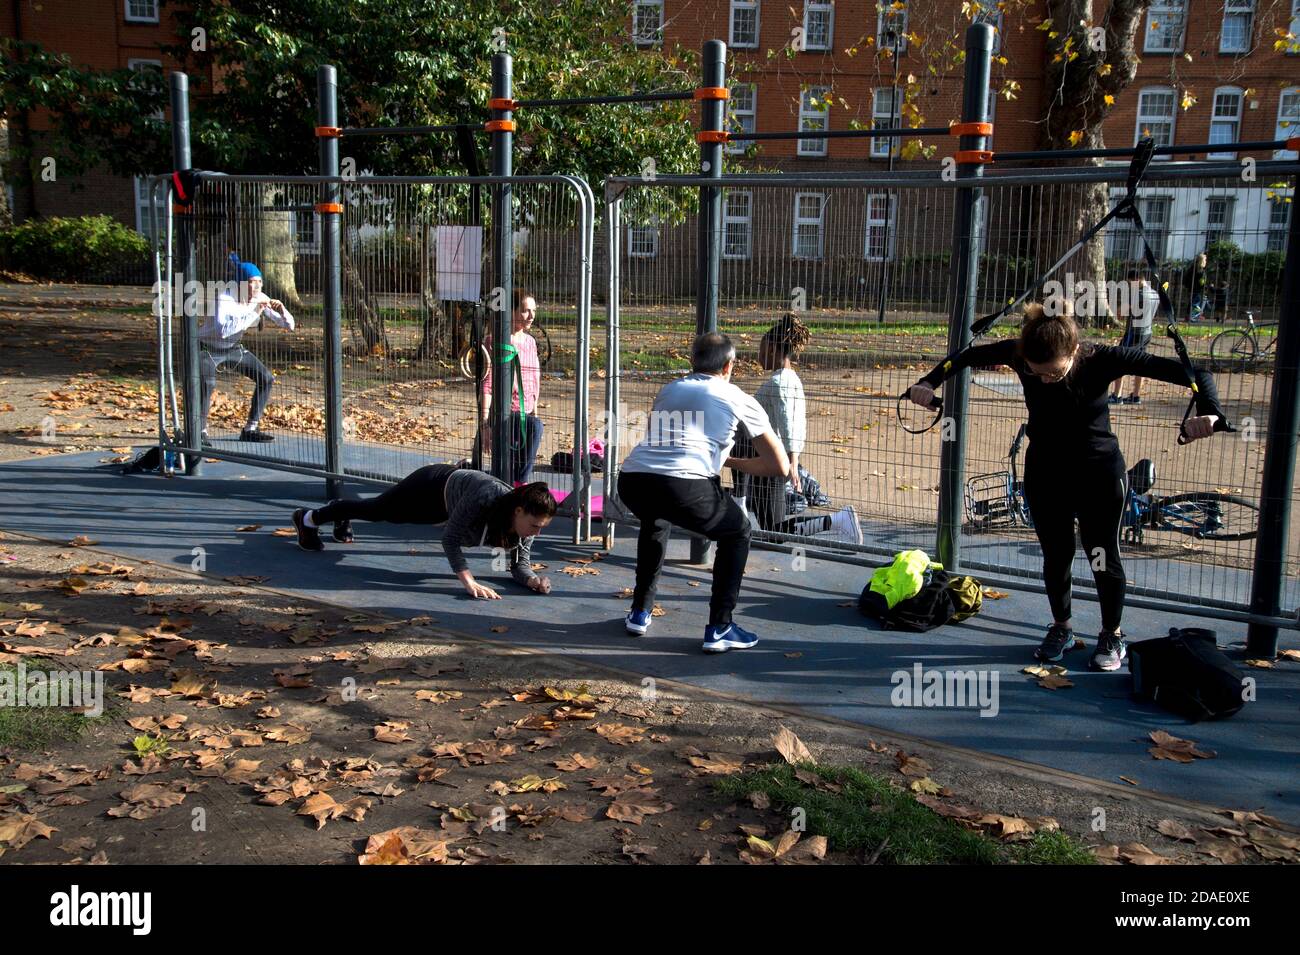 London, Hackney. London Fields. People exercise next to locked up gym equipment Stock Photo